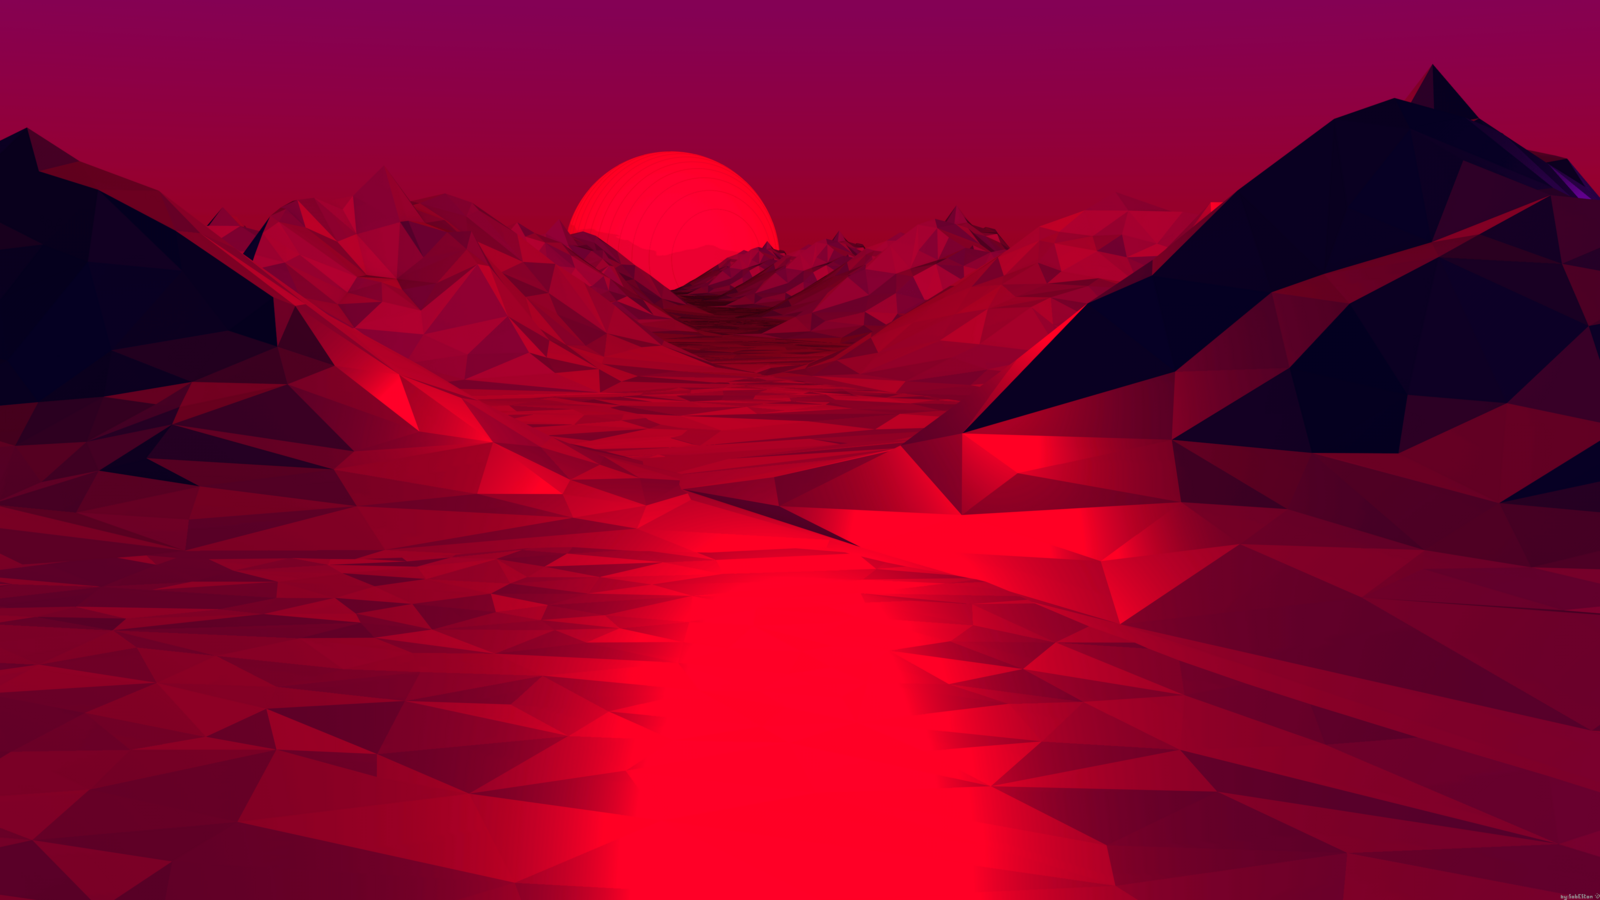 Wallpapers red abstract low poly on the desktop